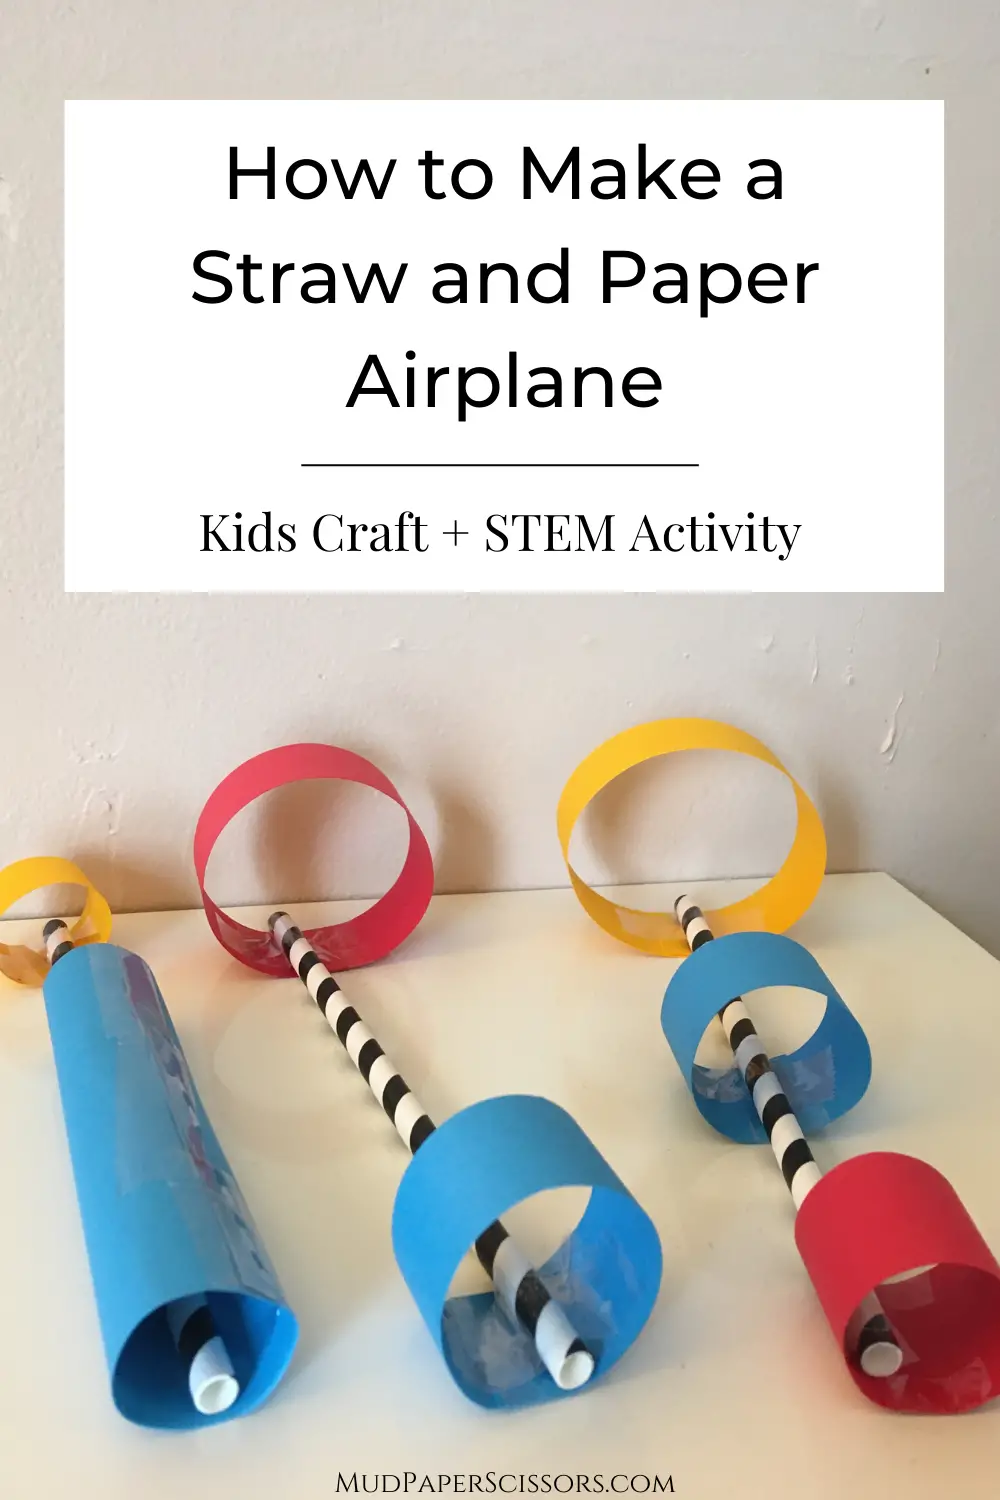 How to Make a Straw and Paper Airplane